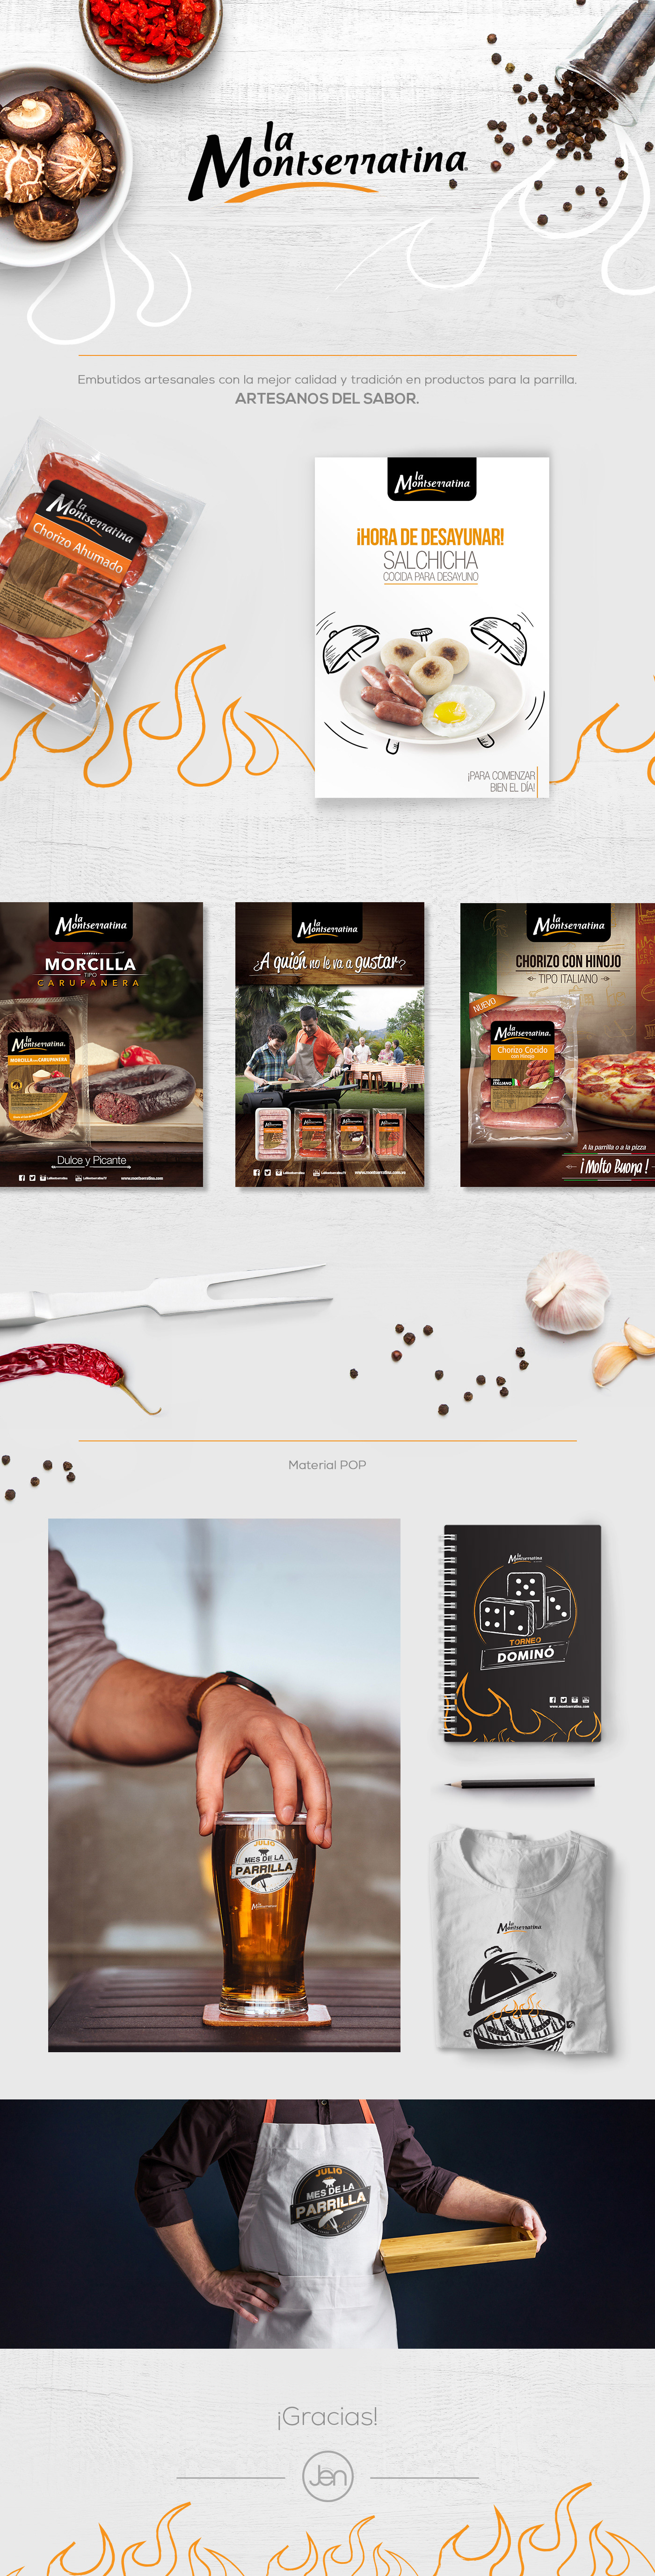 retouch graphic design branding  Food  barbecue Advertising  pop